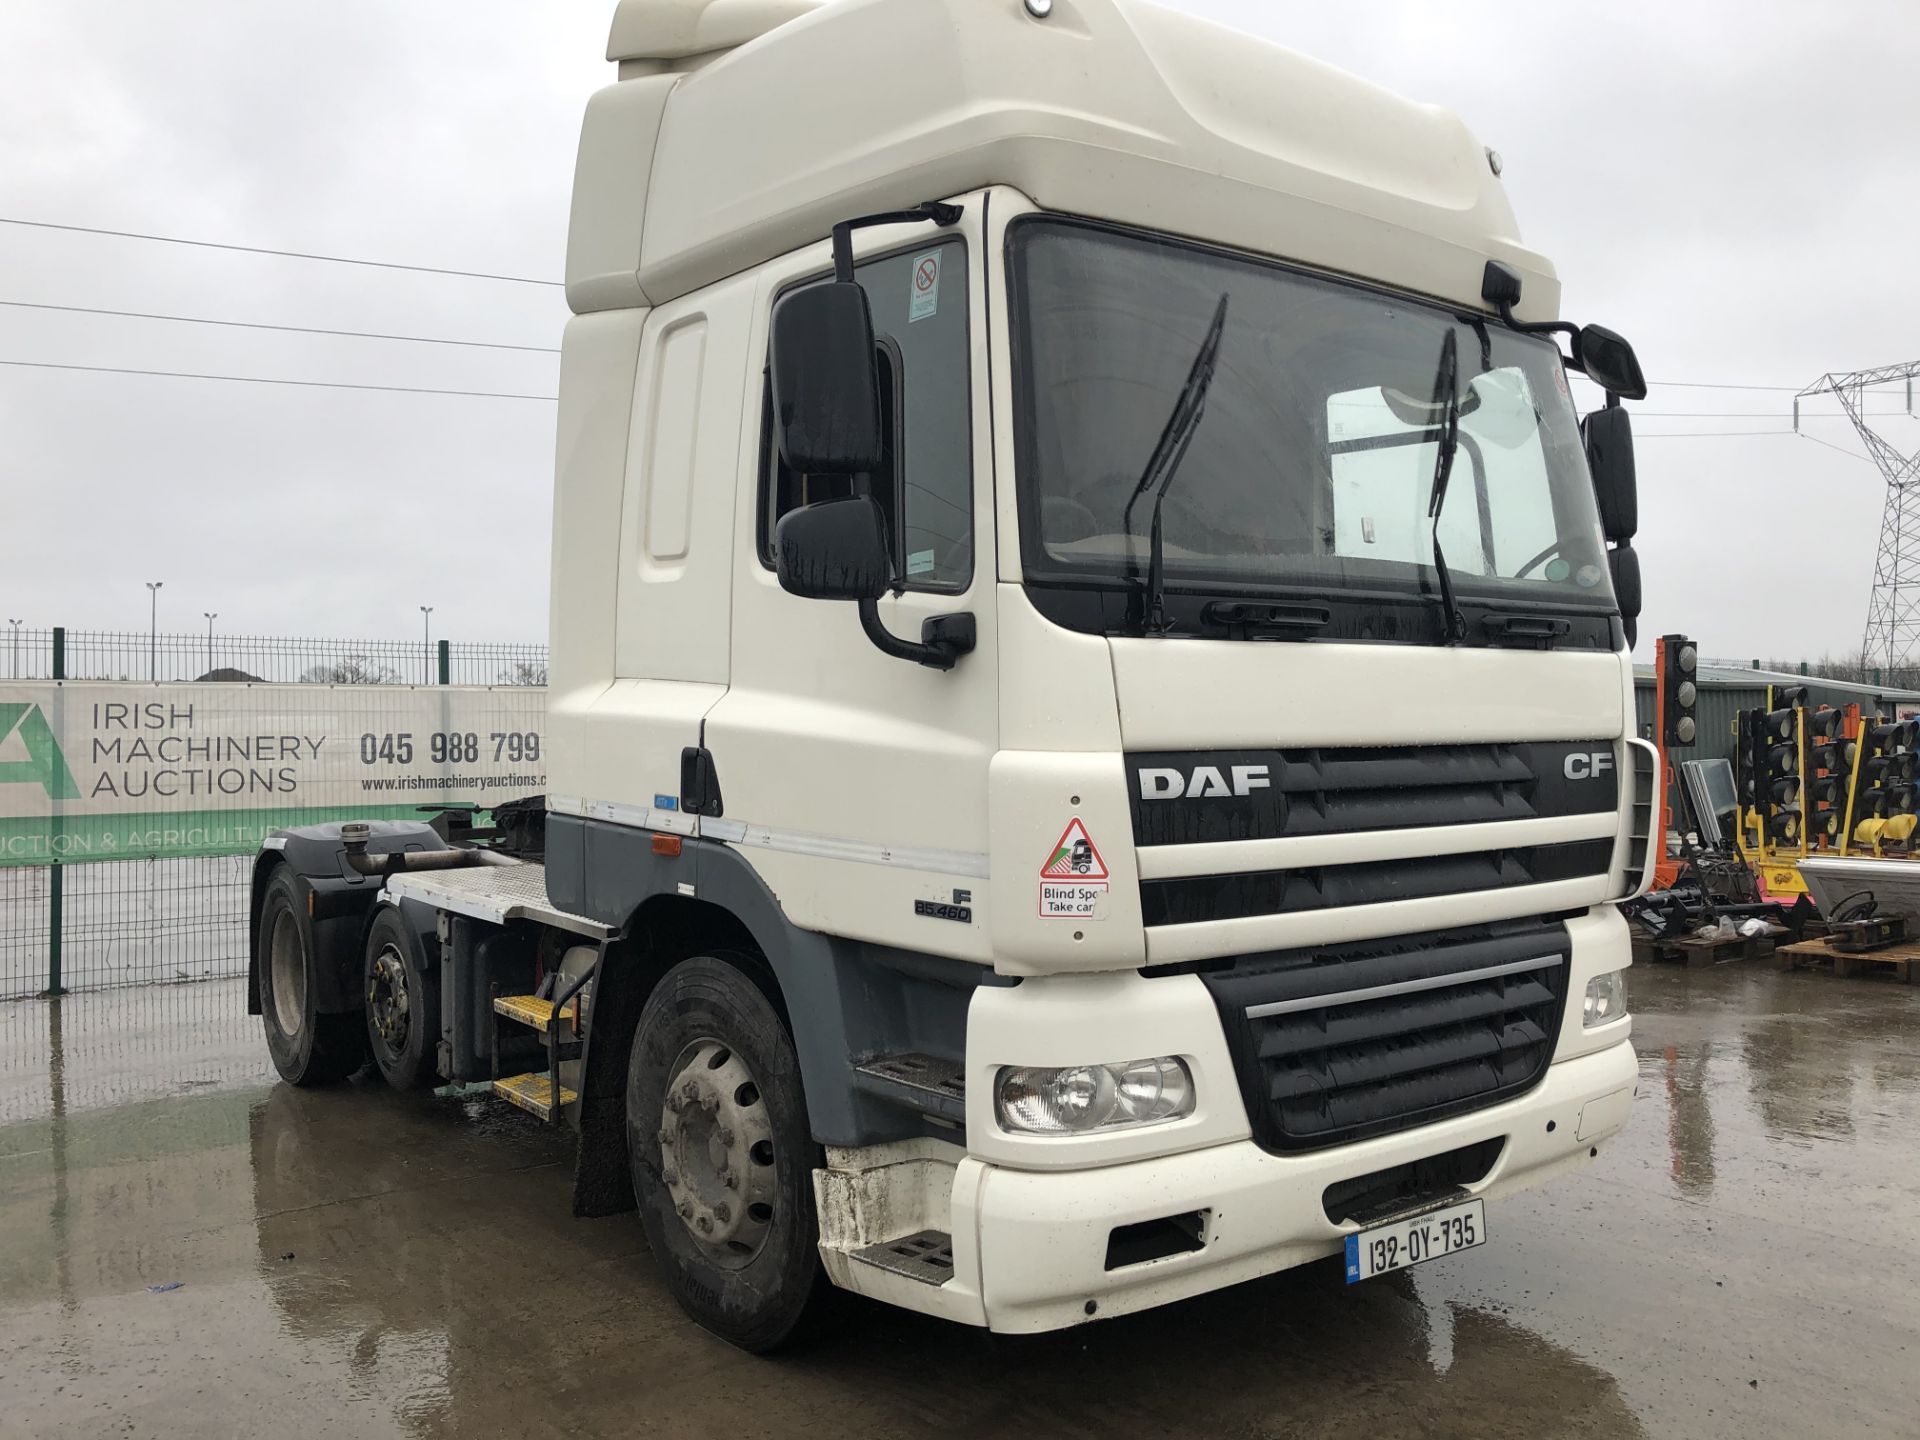 132OY735 2013 DAF FTP CF85.460 Truck - Image 7 of 21